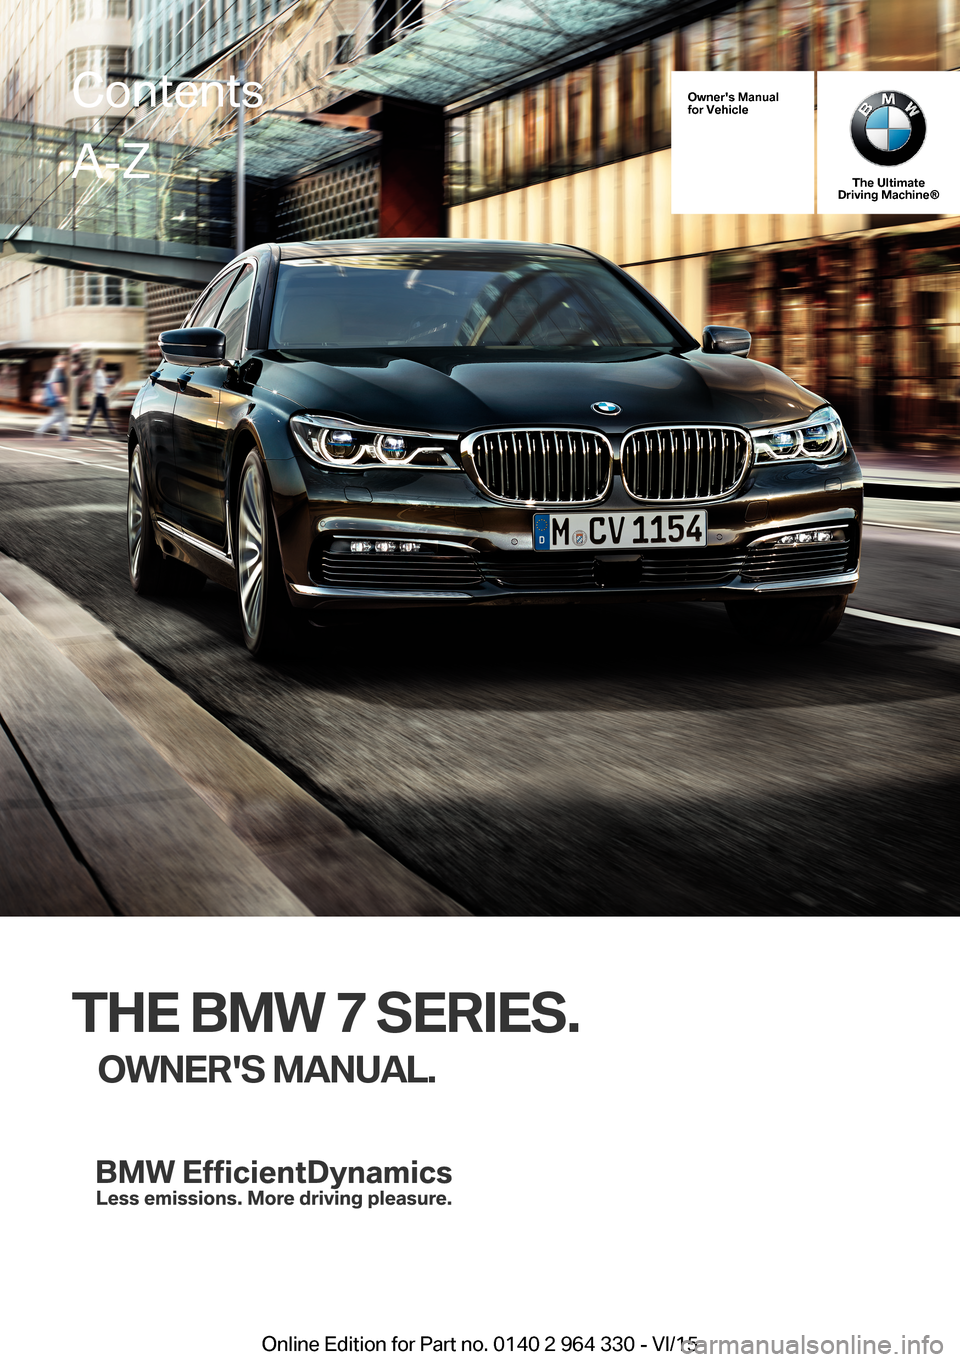 BMW 7 SERIES LONG 2015 G12 Owners Manual Owners Manualfor Vehicle
The UltimateDriving Machine®
THE BMW 7 SERIES.
OWNERS MANUAL.ContentsA-Z
Online Edition for Part no. 0140 2 964 330 - VI/15   